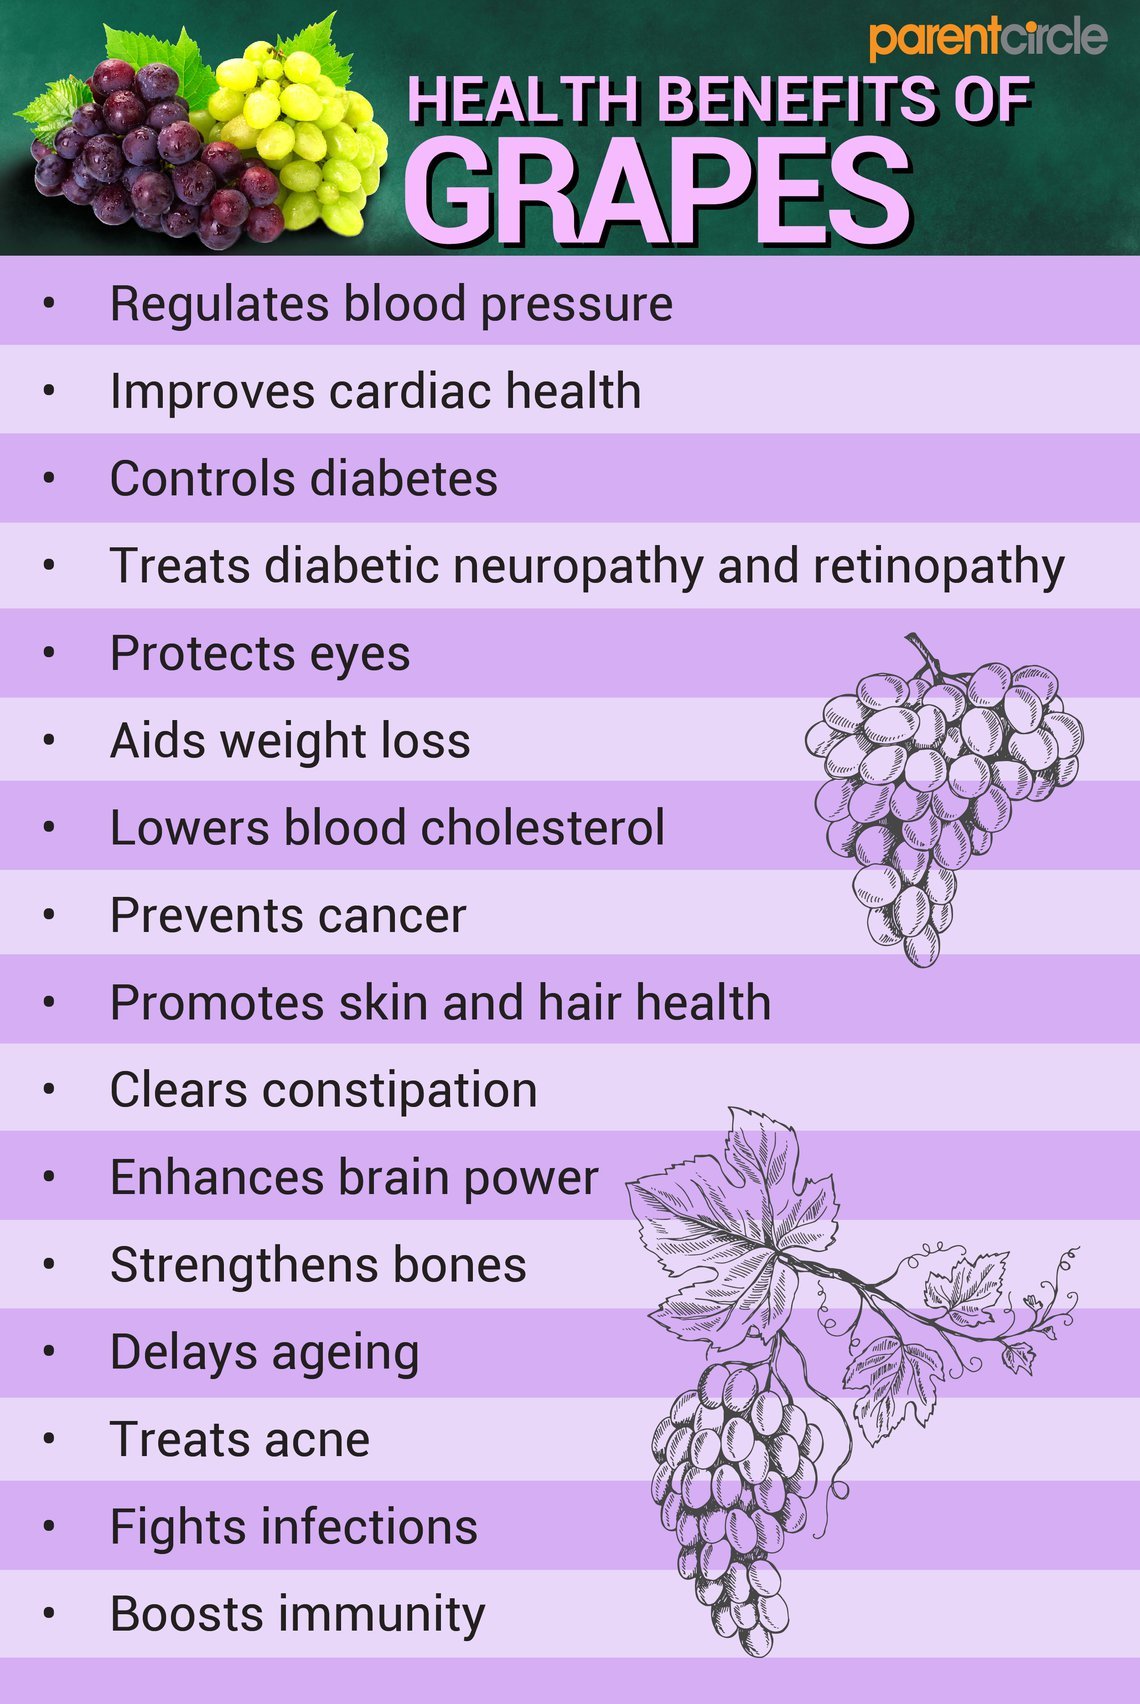 Grapes Nutritional Value per 100g, Grapes Health Benefits & Nutrition  Facts, Grapes Calories and Vitamins, Uses of Grapes | ParentCircle